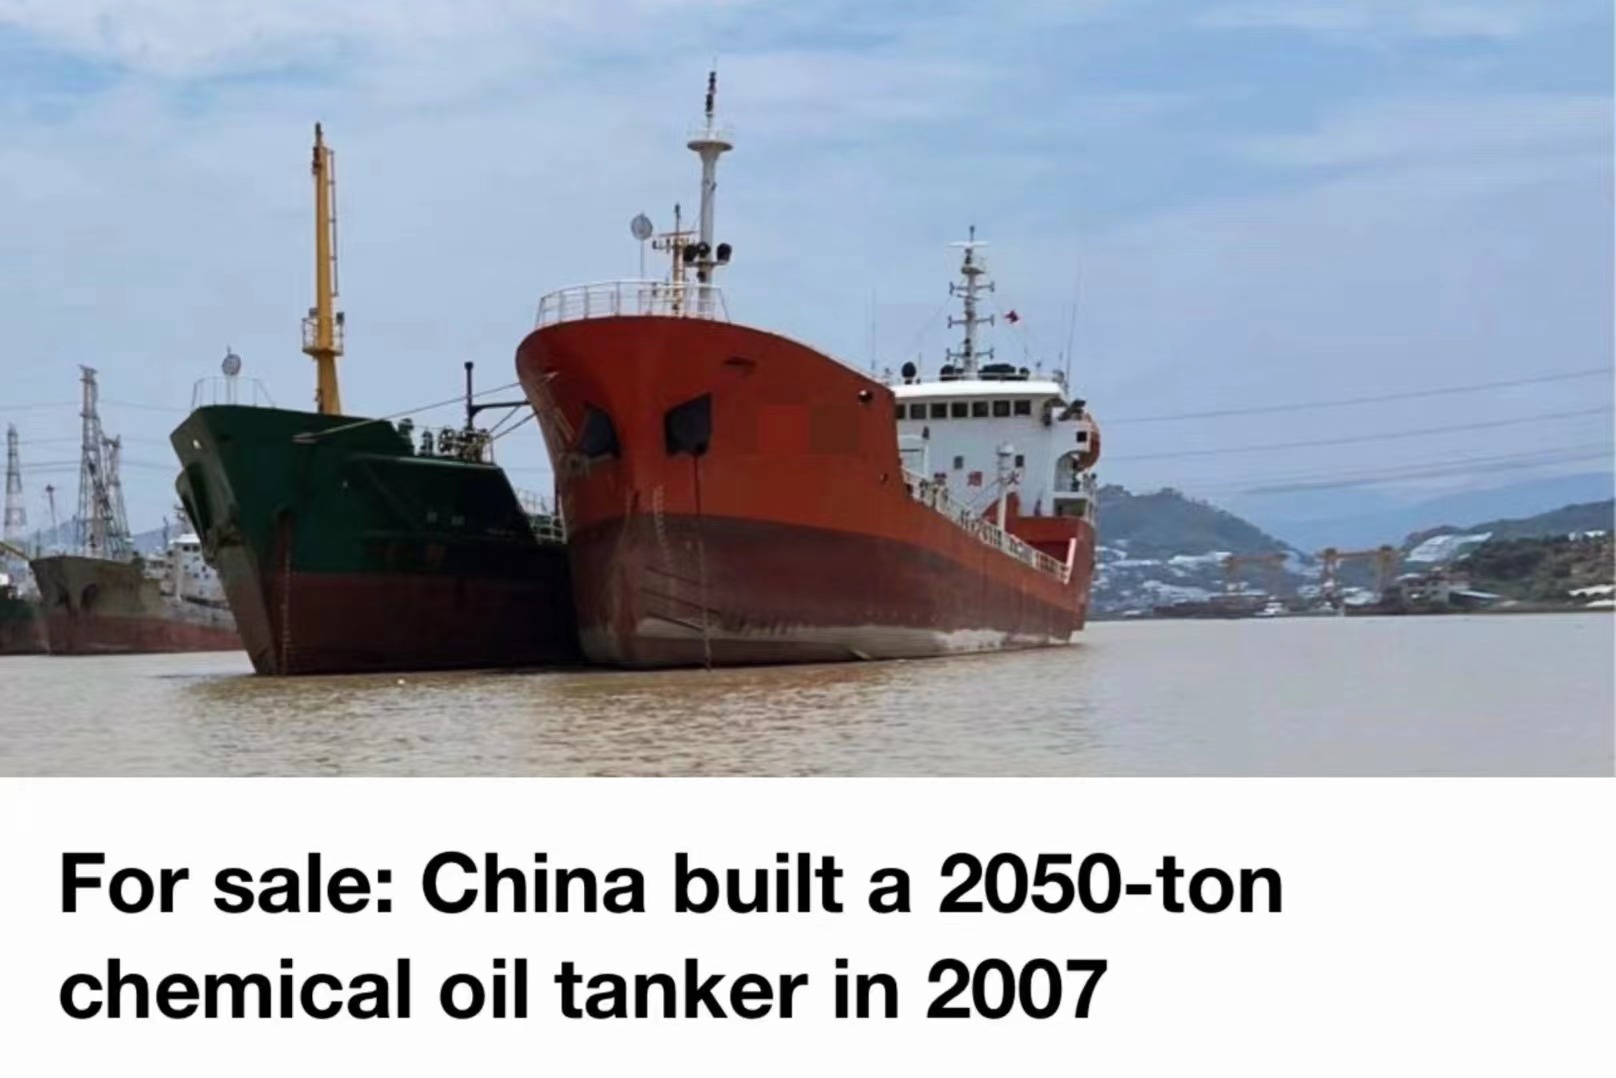 For sale: 2050 tons of chemical oil tanker, built in Zhejiang, China in 2007, suitable for foreign trade export.